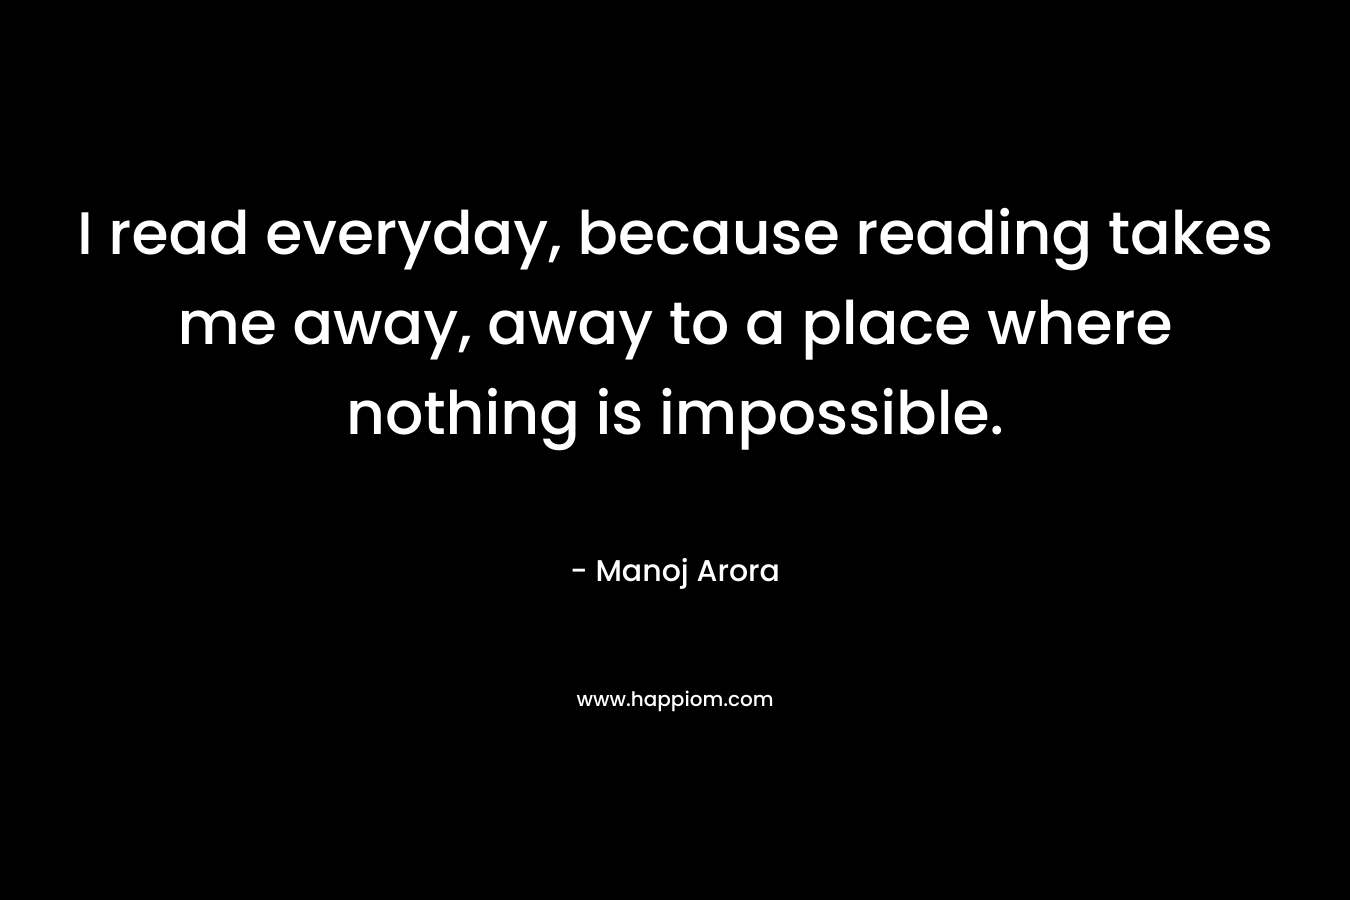 I read everyday, because reading takes me away, away to a place where nothing is impossible. – Manoj Arora